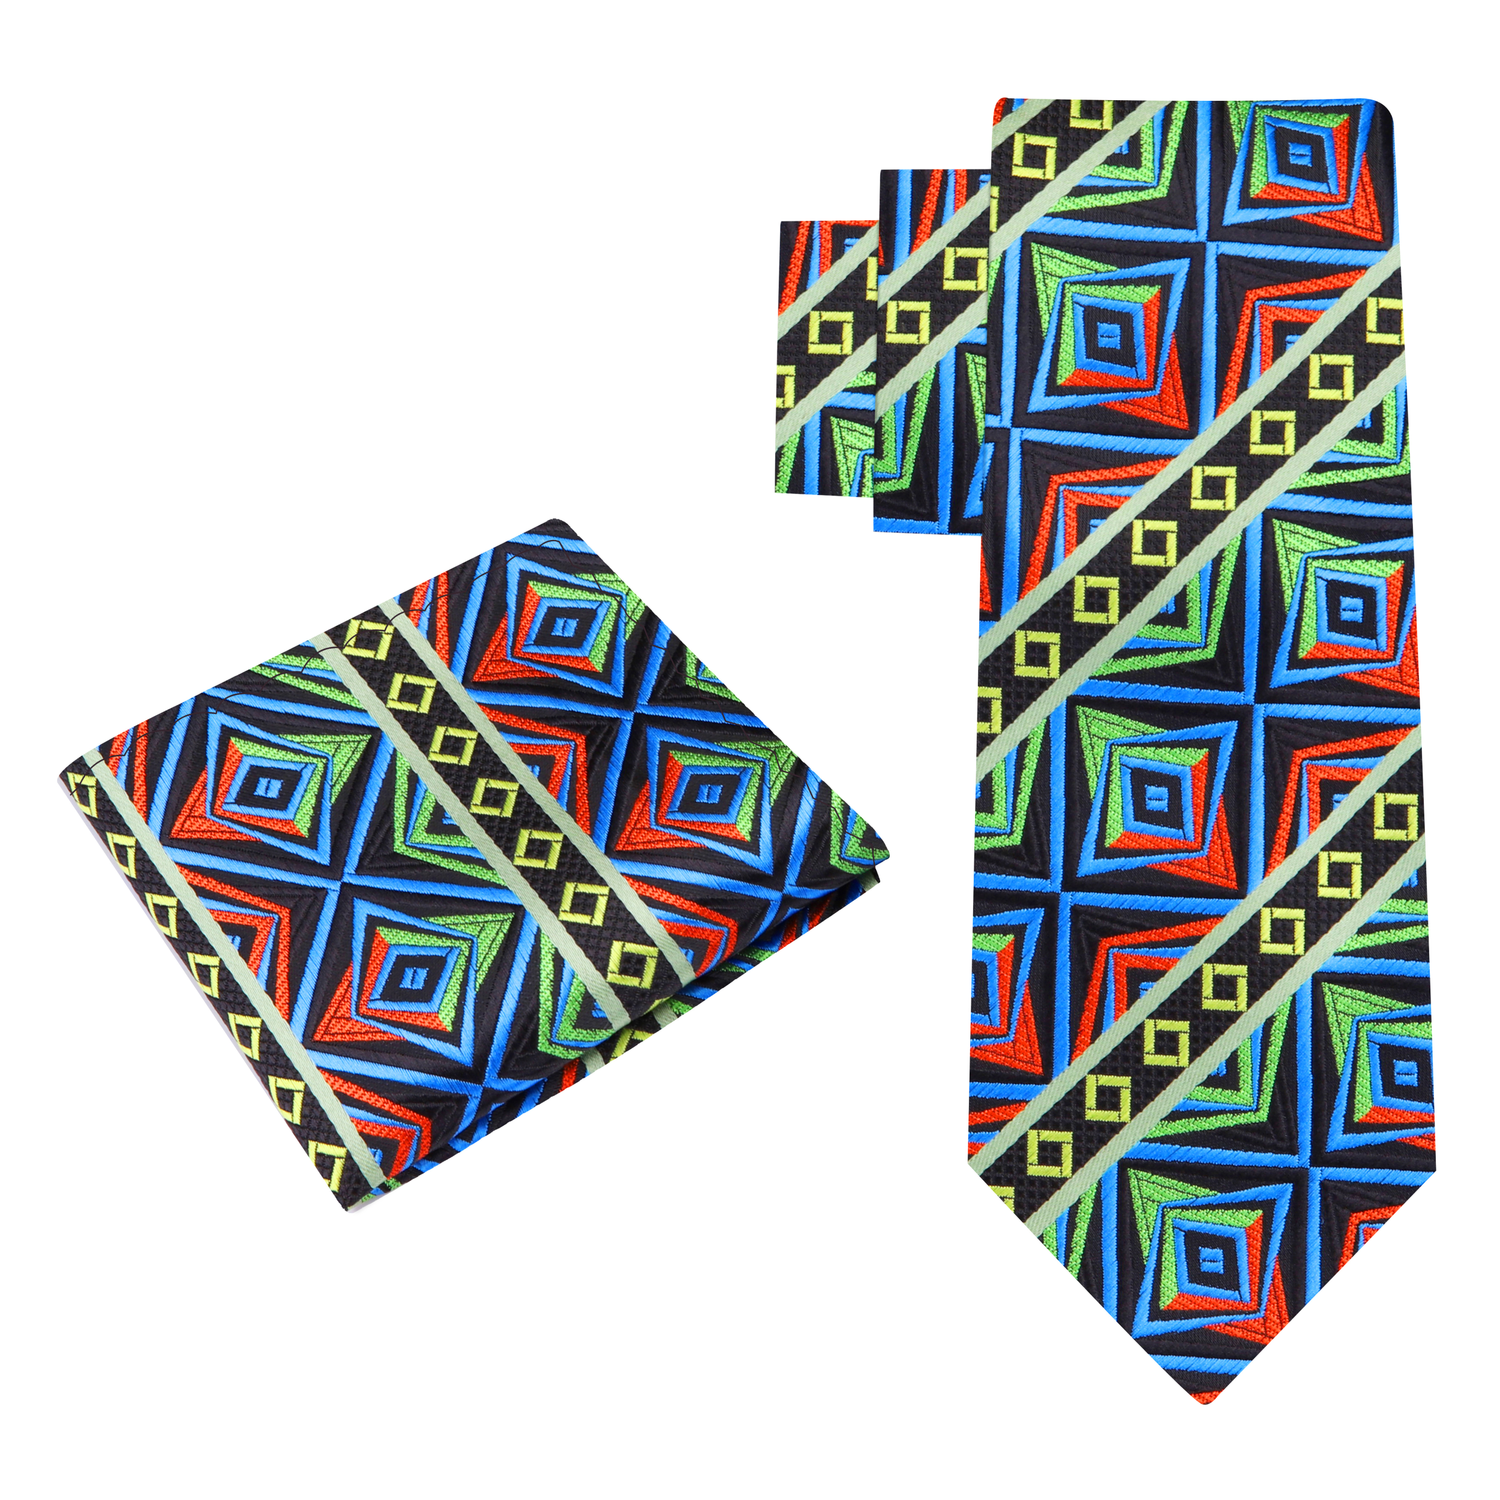 View 2: A Green, Orange, Yellow, Blue, Black Abstract Geometric Shapes And Squares Pattern Silk Necktie, Matching Pocket Square 